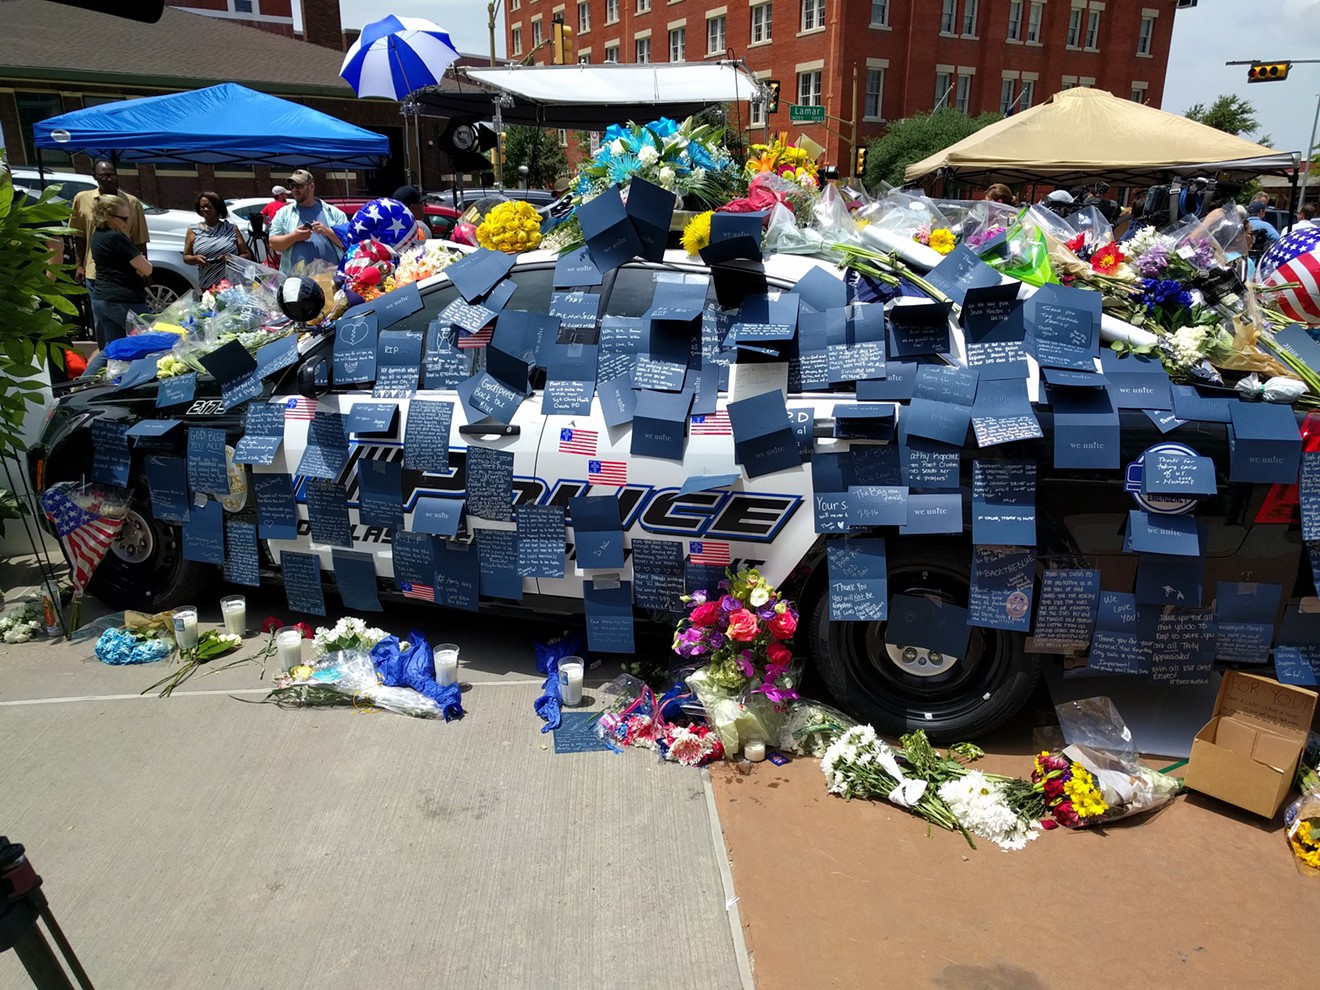 One of the impromptu memorials in front of Jack Evans Police headquarters on July 9, 2016.